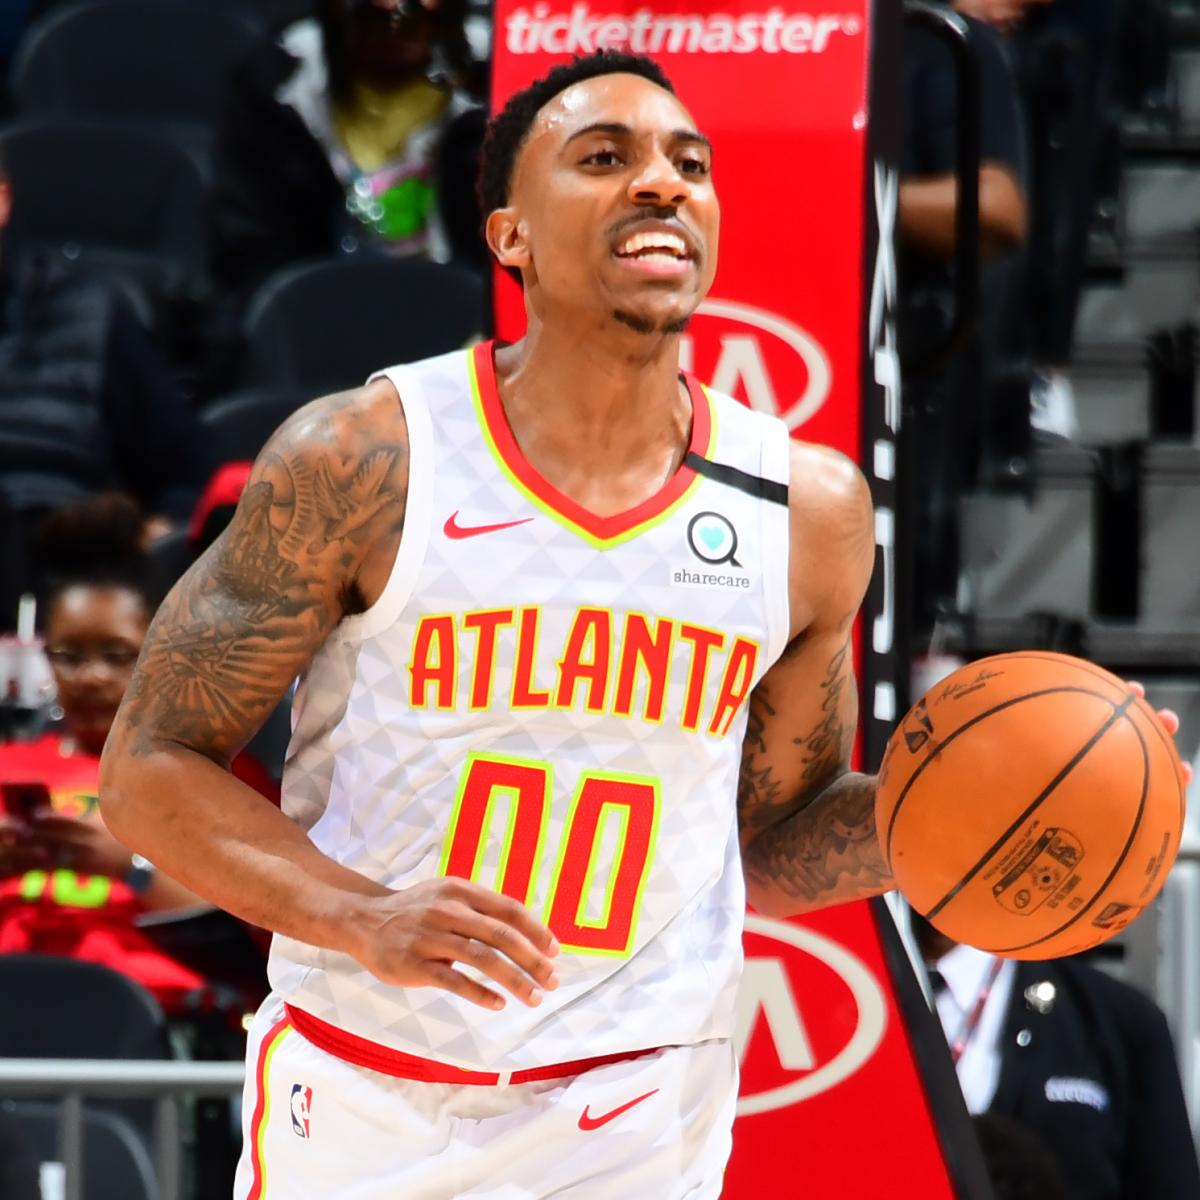 Easy!- Jeff Teague, who made $98,000,000 from NBA contracts